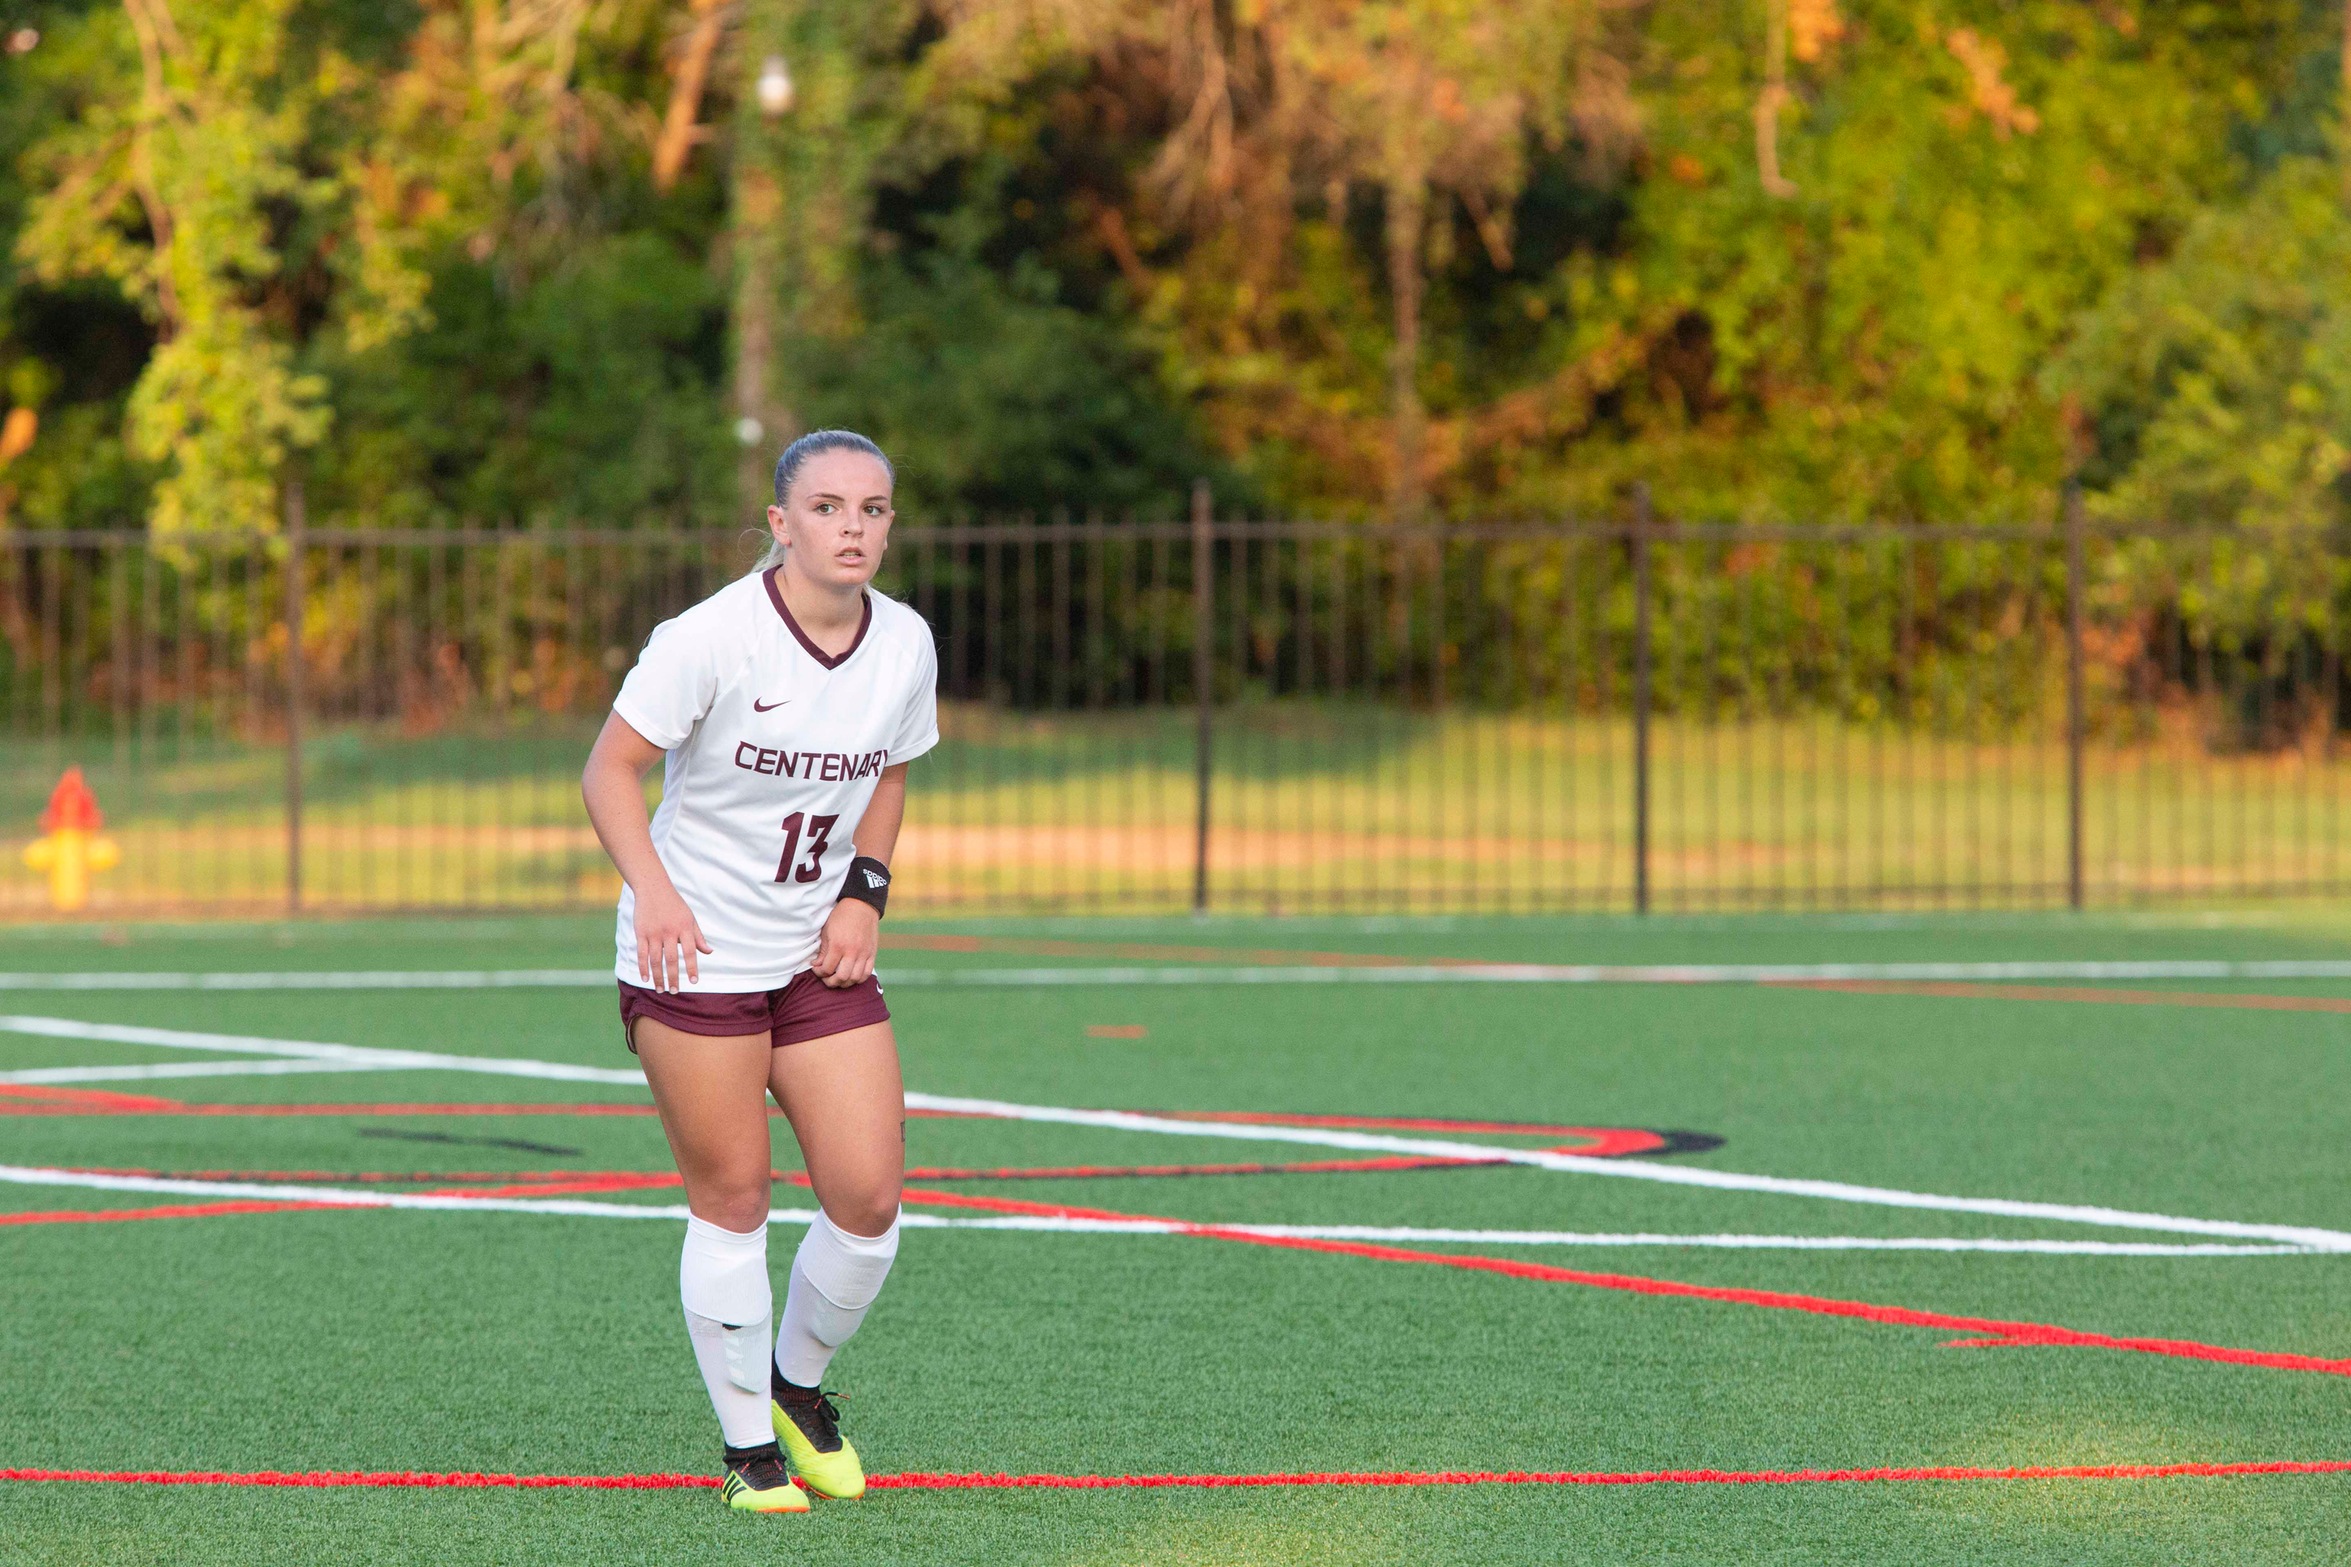 Ladies Fall To Belhaven At Home On Friday, 3-0